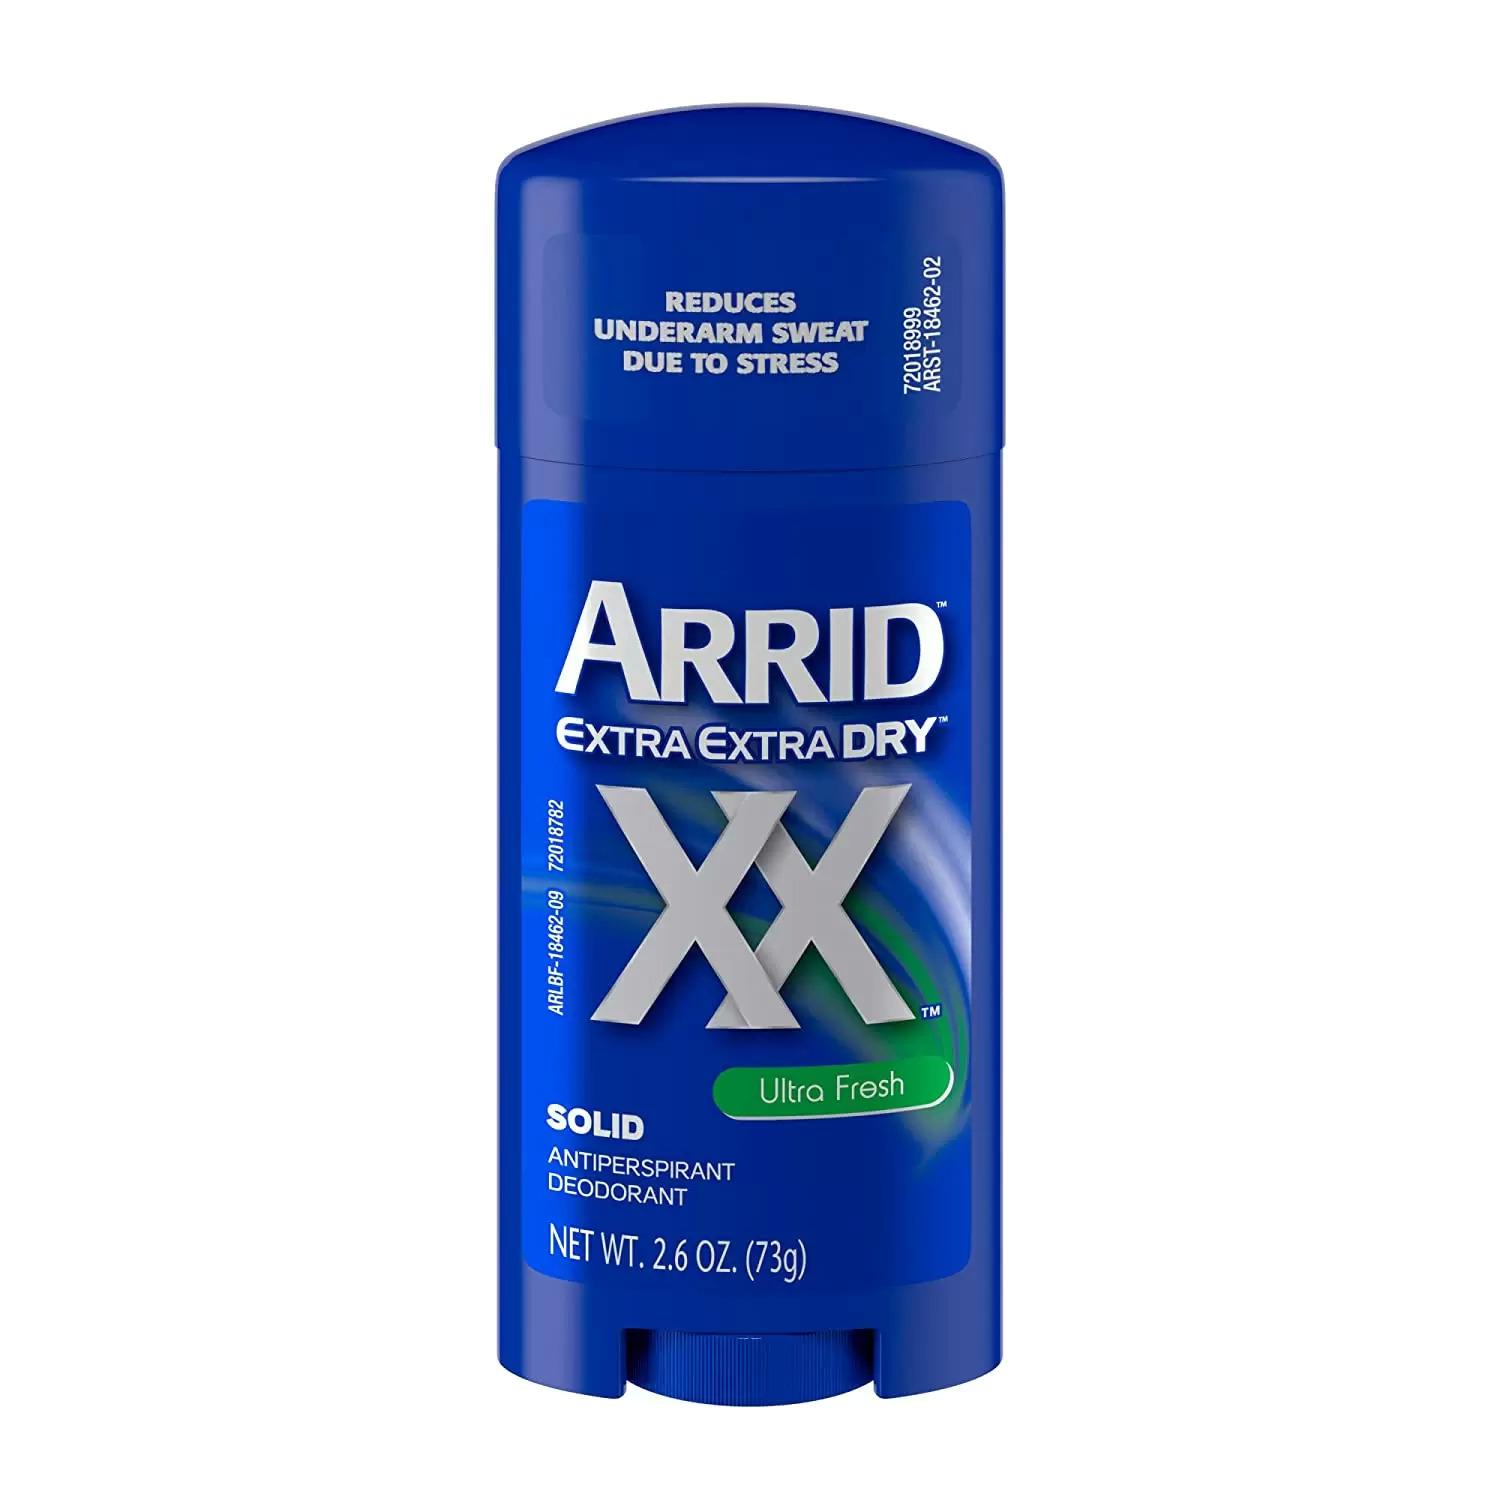 Arrid XX Extra Extra Dry Solid Antiperspirant Deodorant for $1.29 Shipped